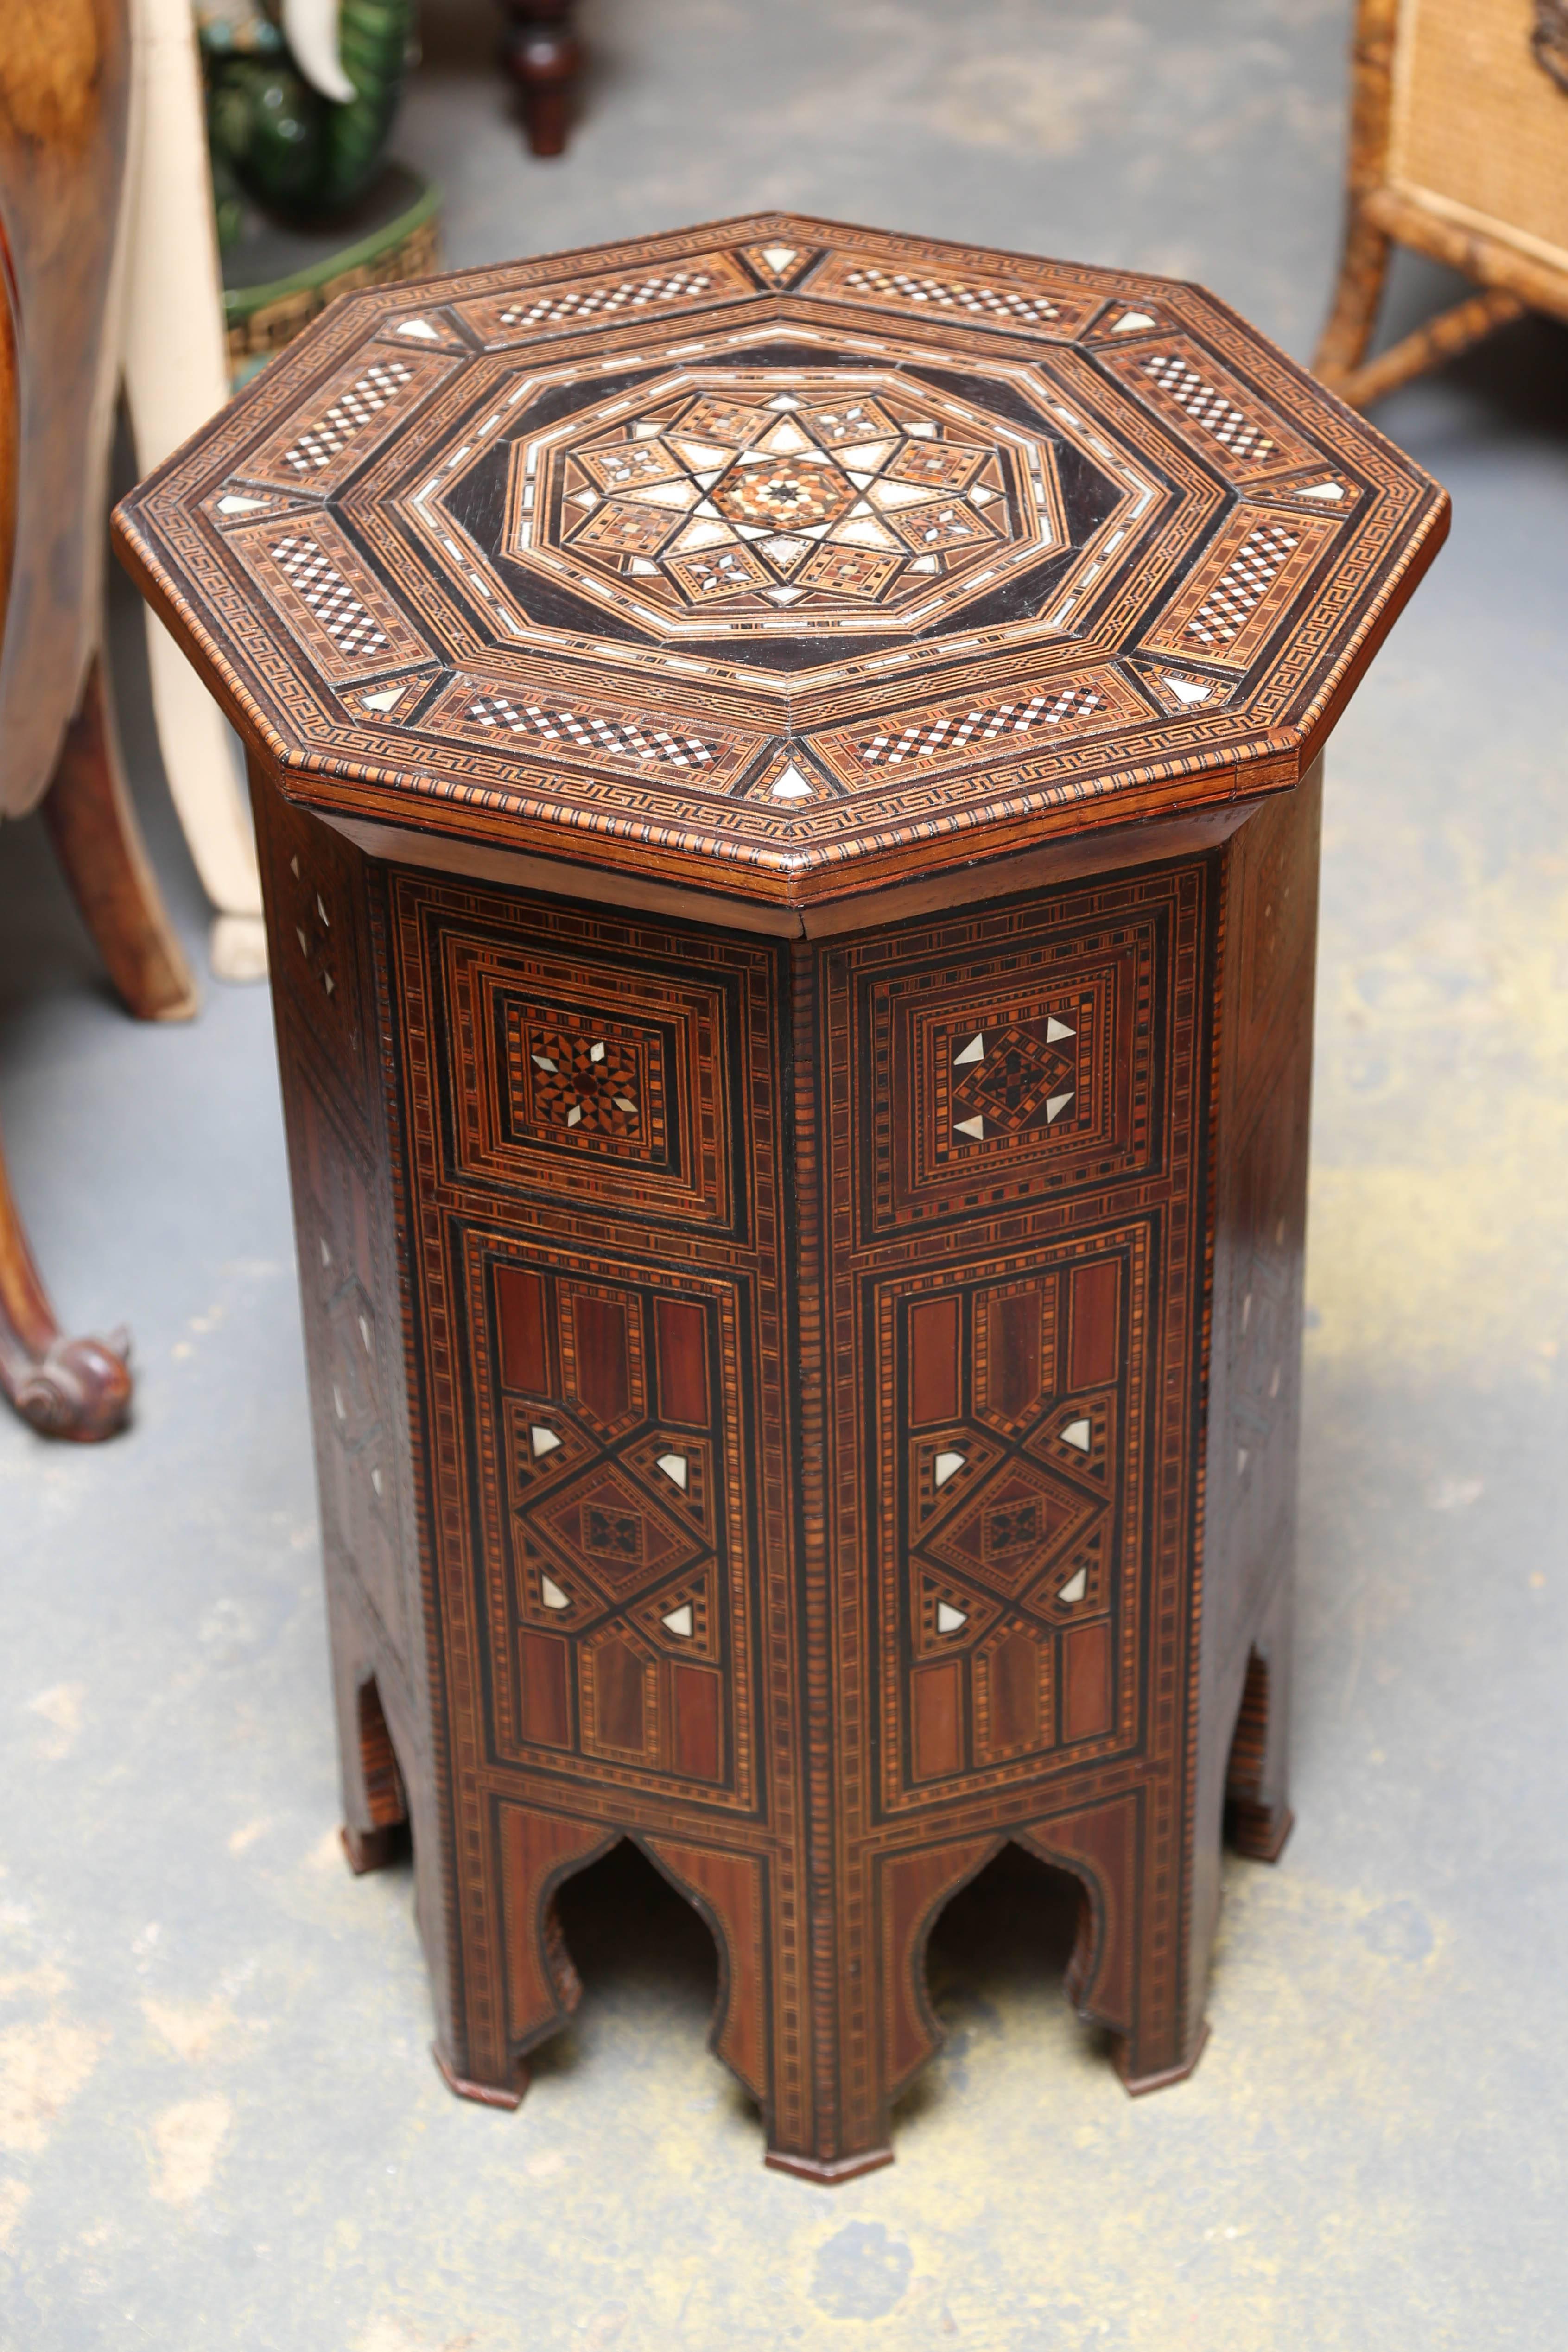 An outstanding example, tall, and nicely scaled with 1,000s of pieces of fine inlay.
The top is inlaid with a dramatic star.
 